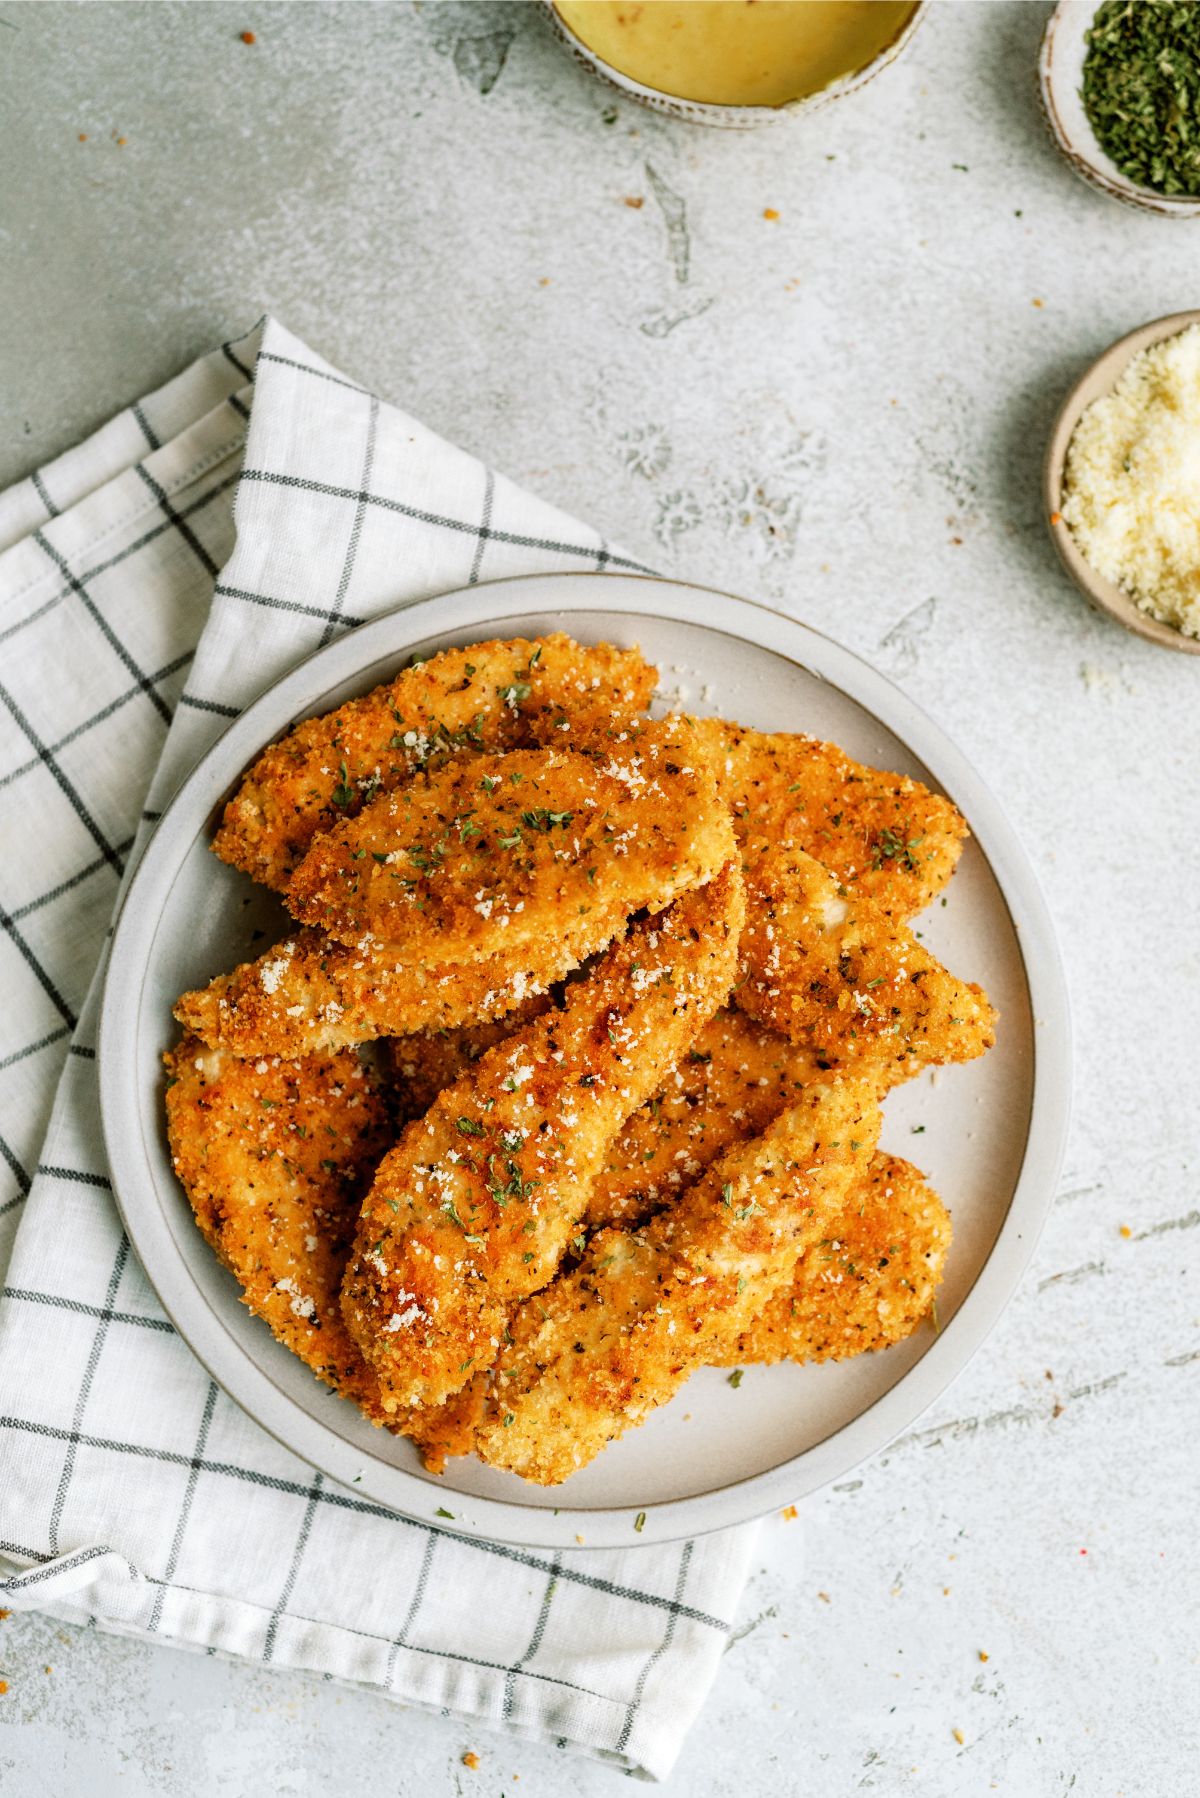 Baked Panko Chicken on a plate